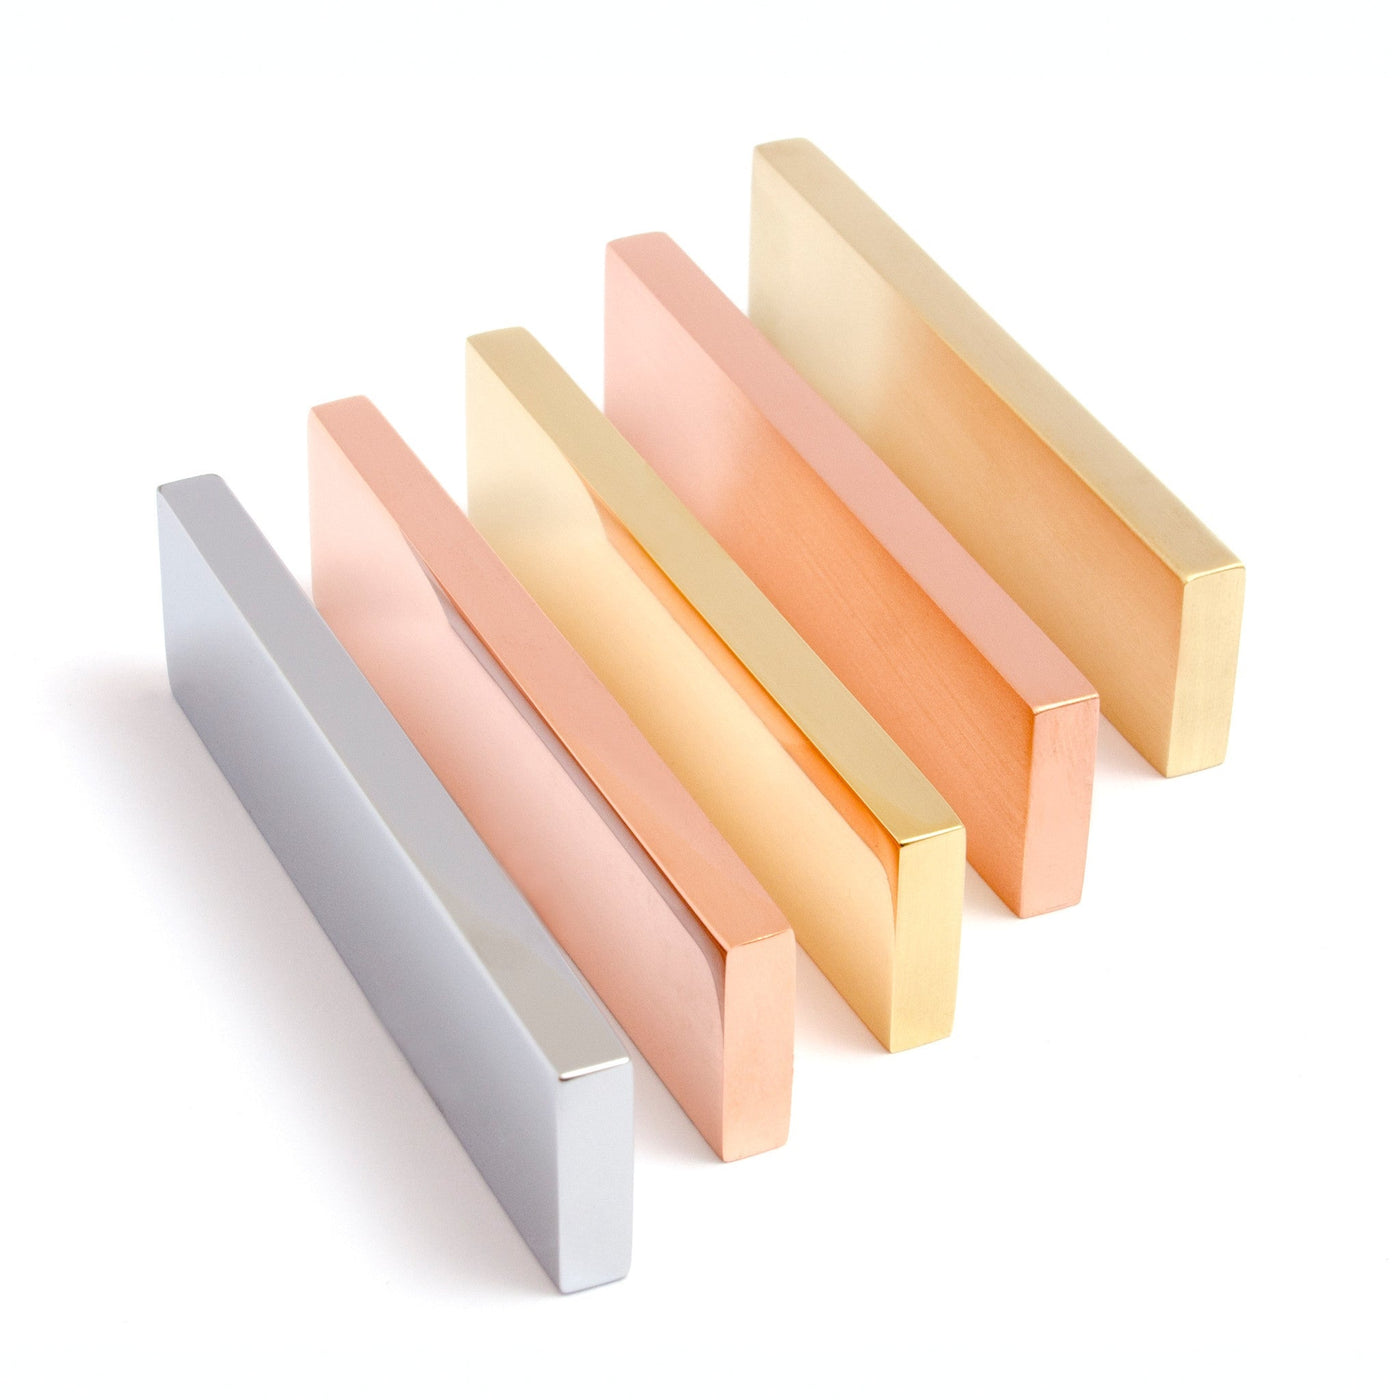 A group of three Baccman Berglund Clean Cut Pull wooden blocks, each a different color.